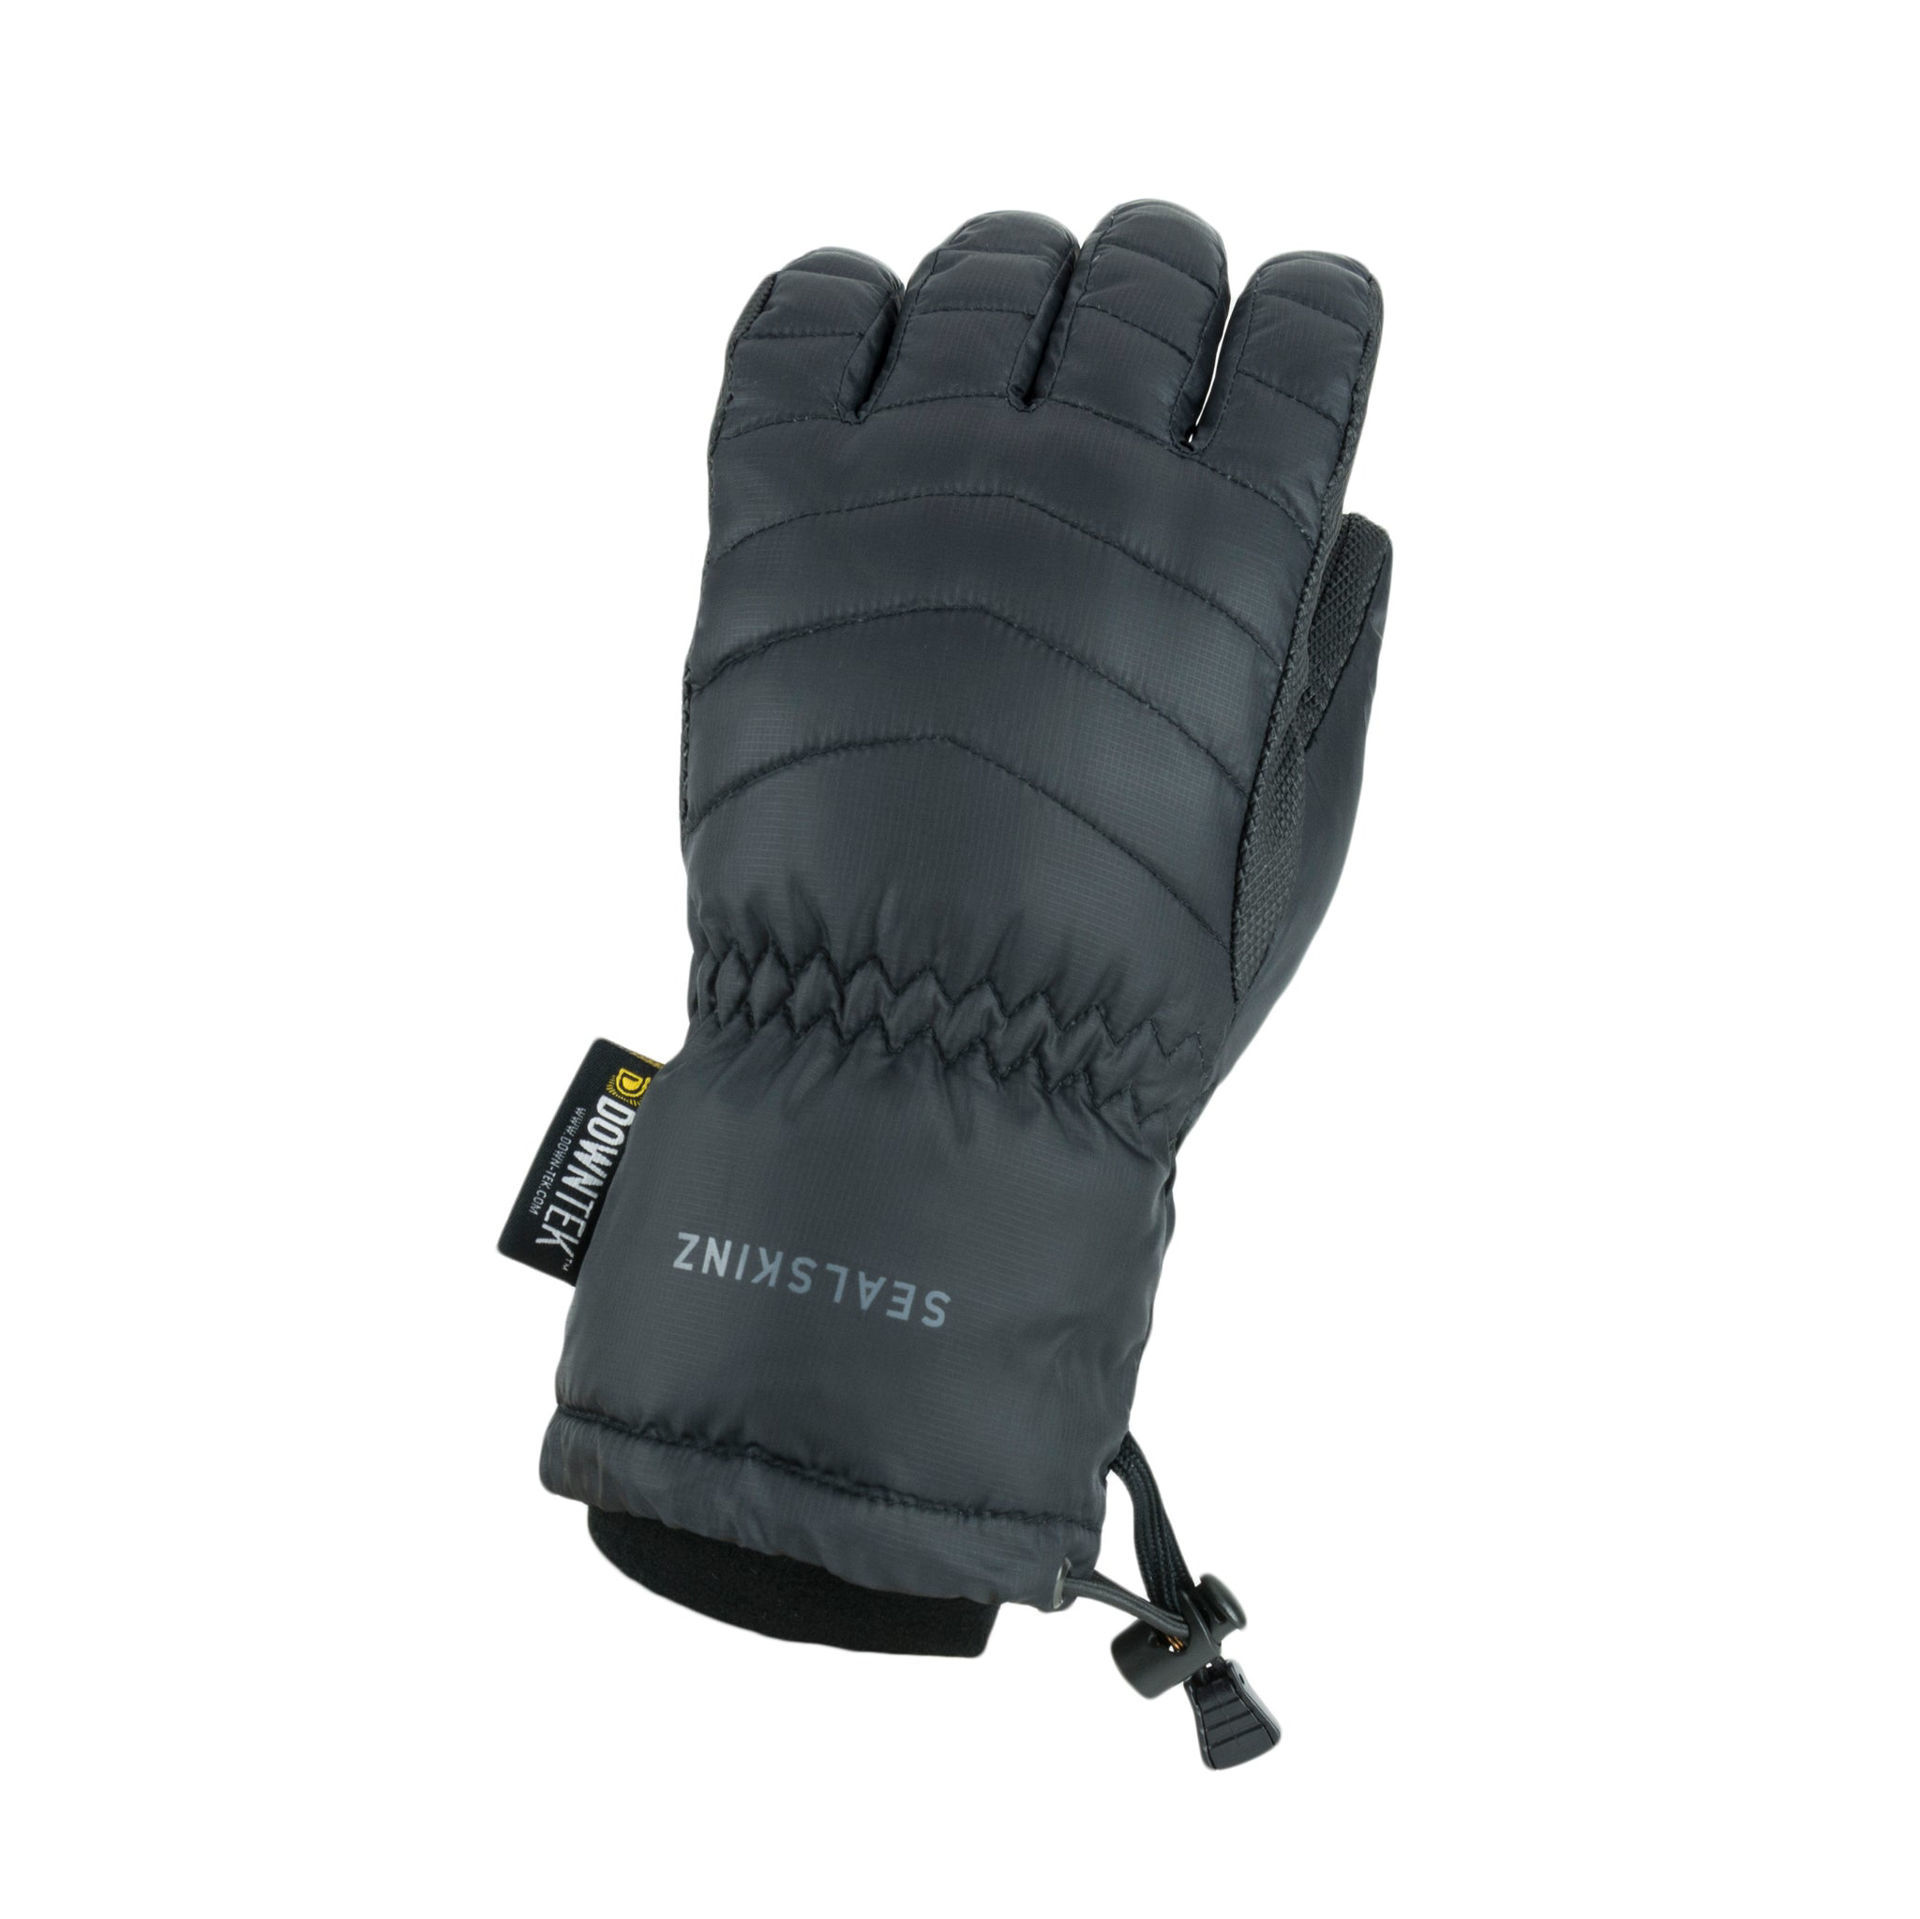 Sealskinz Waterproof Extreme Cold Weather Down Glove